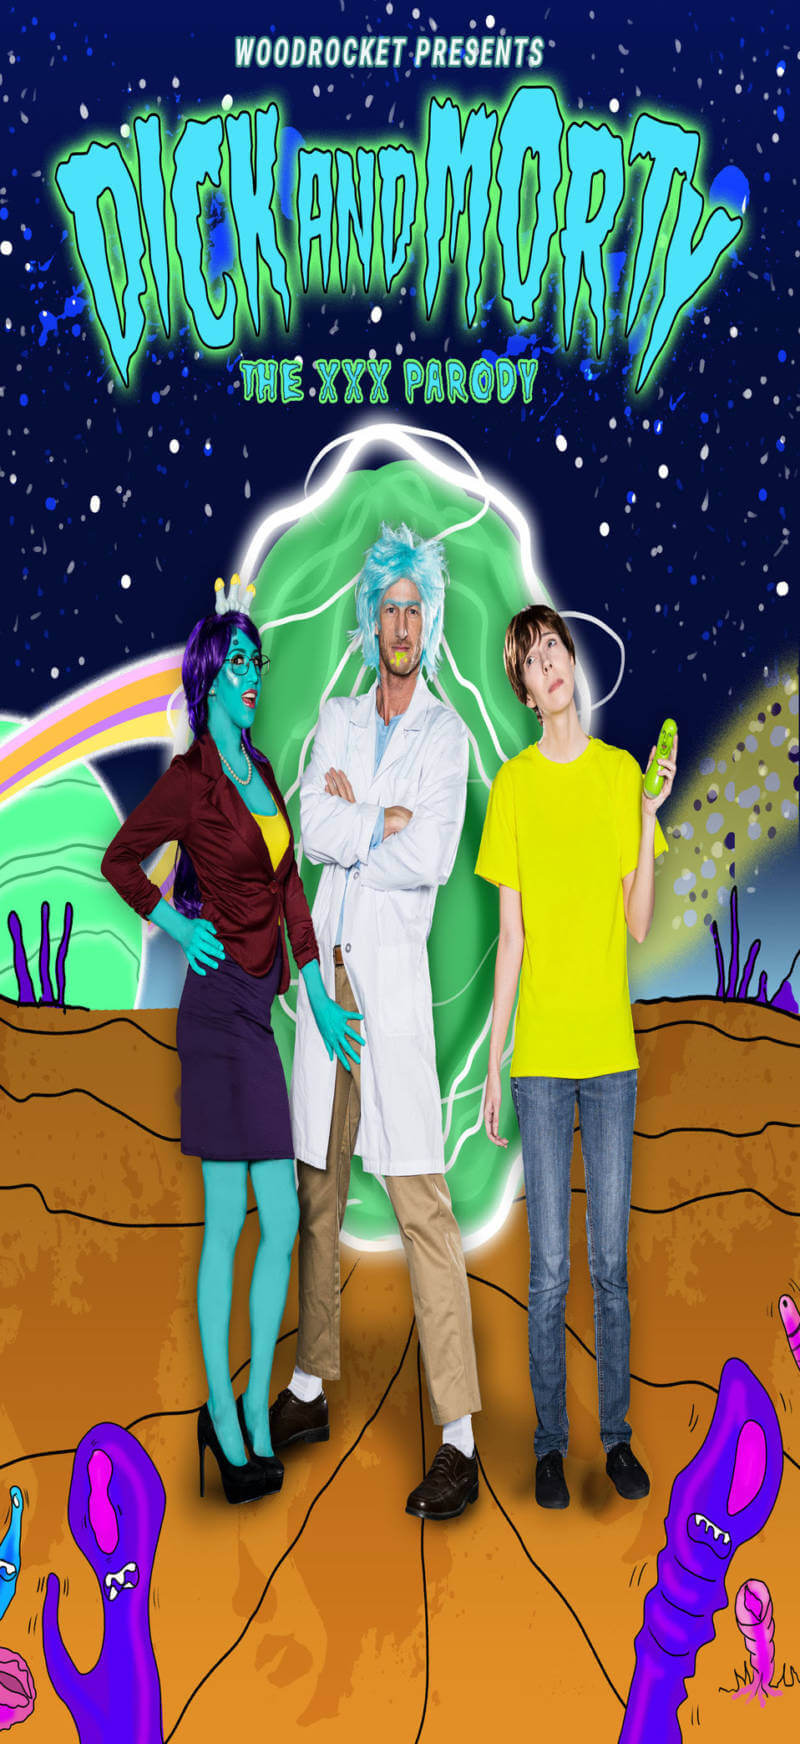 Rick and morty poen